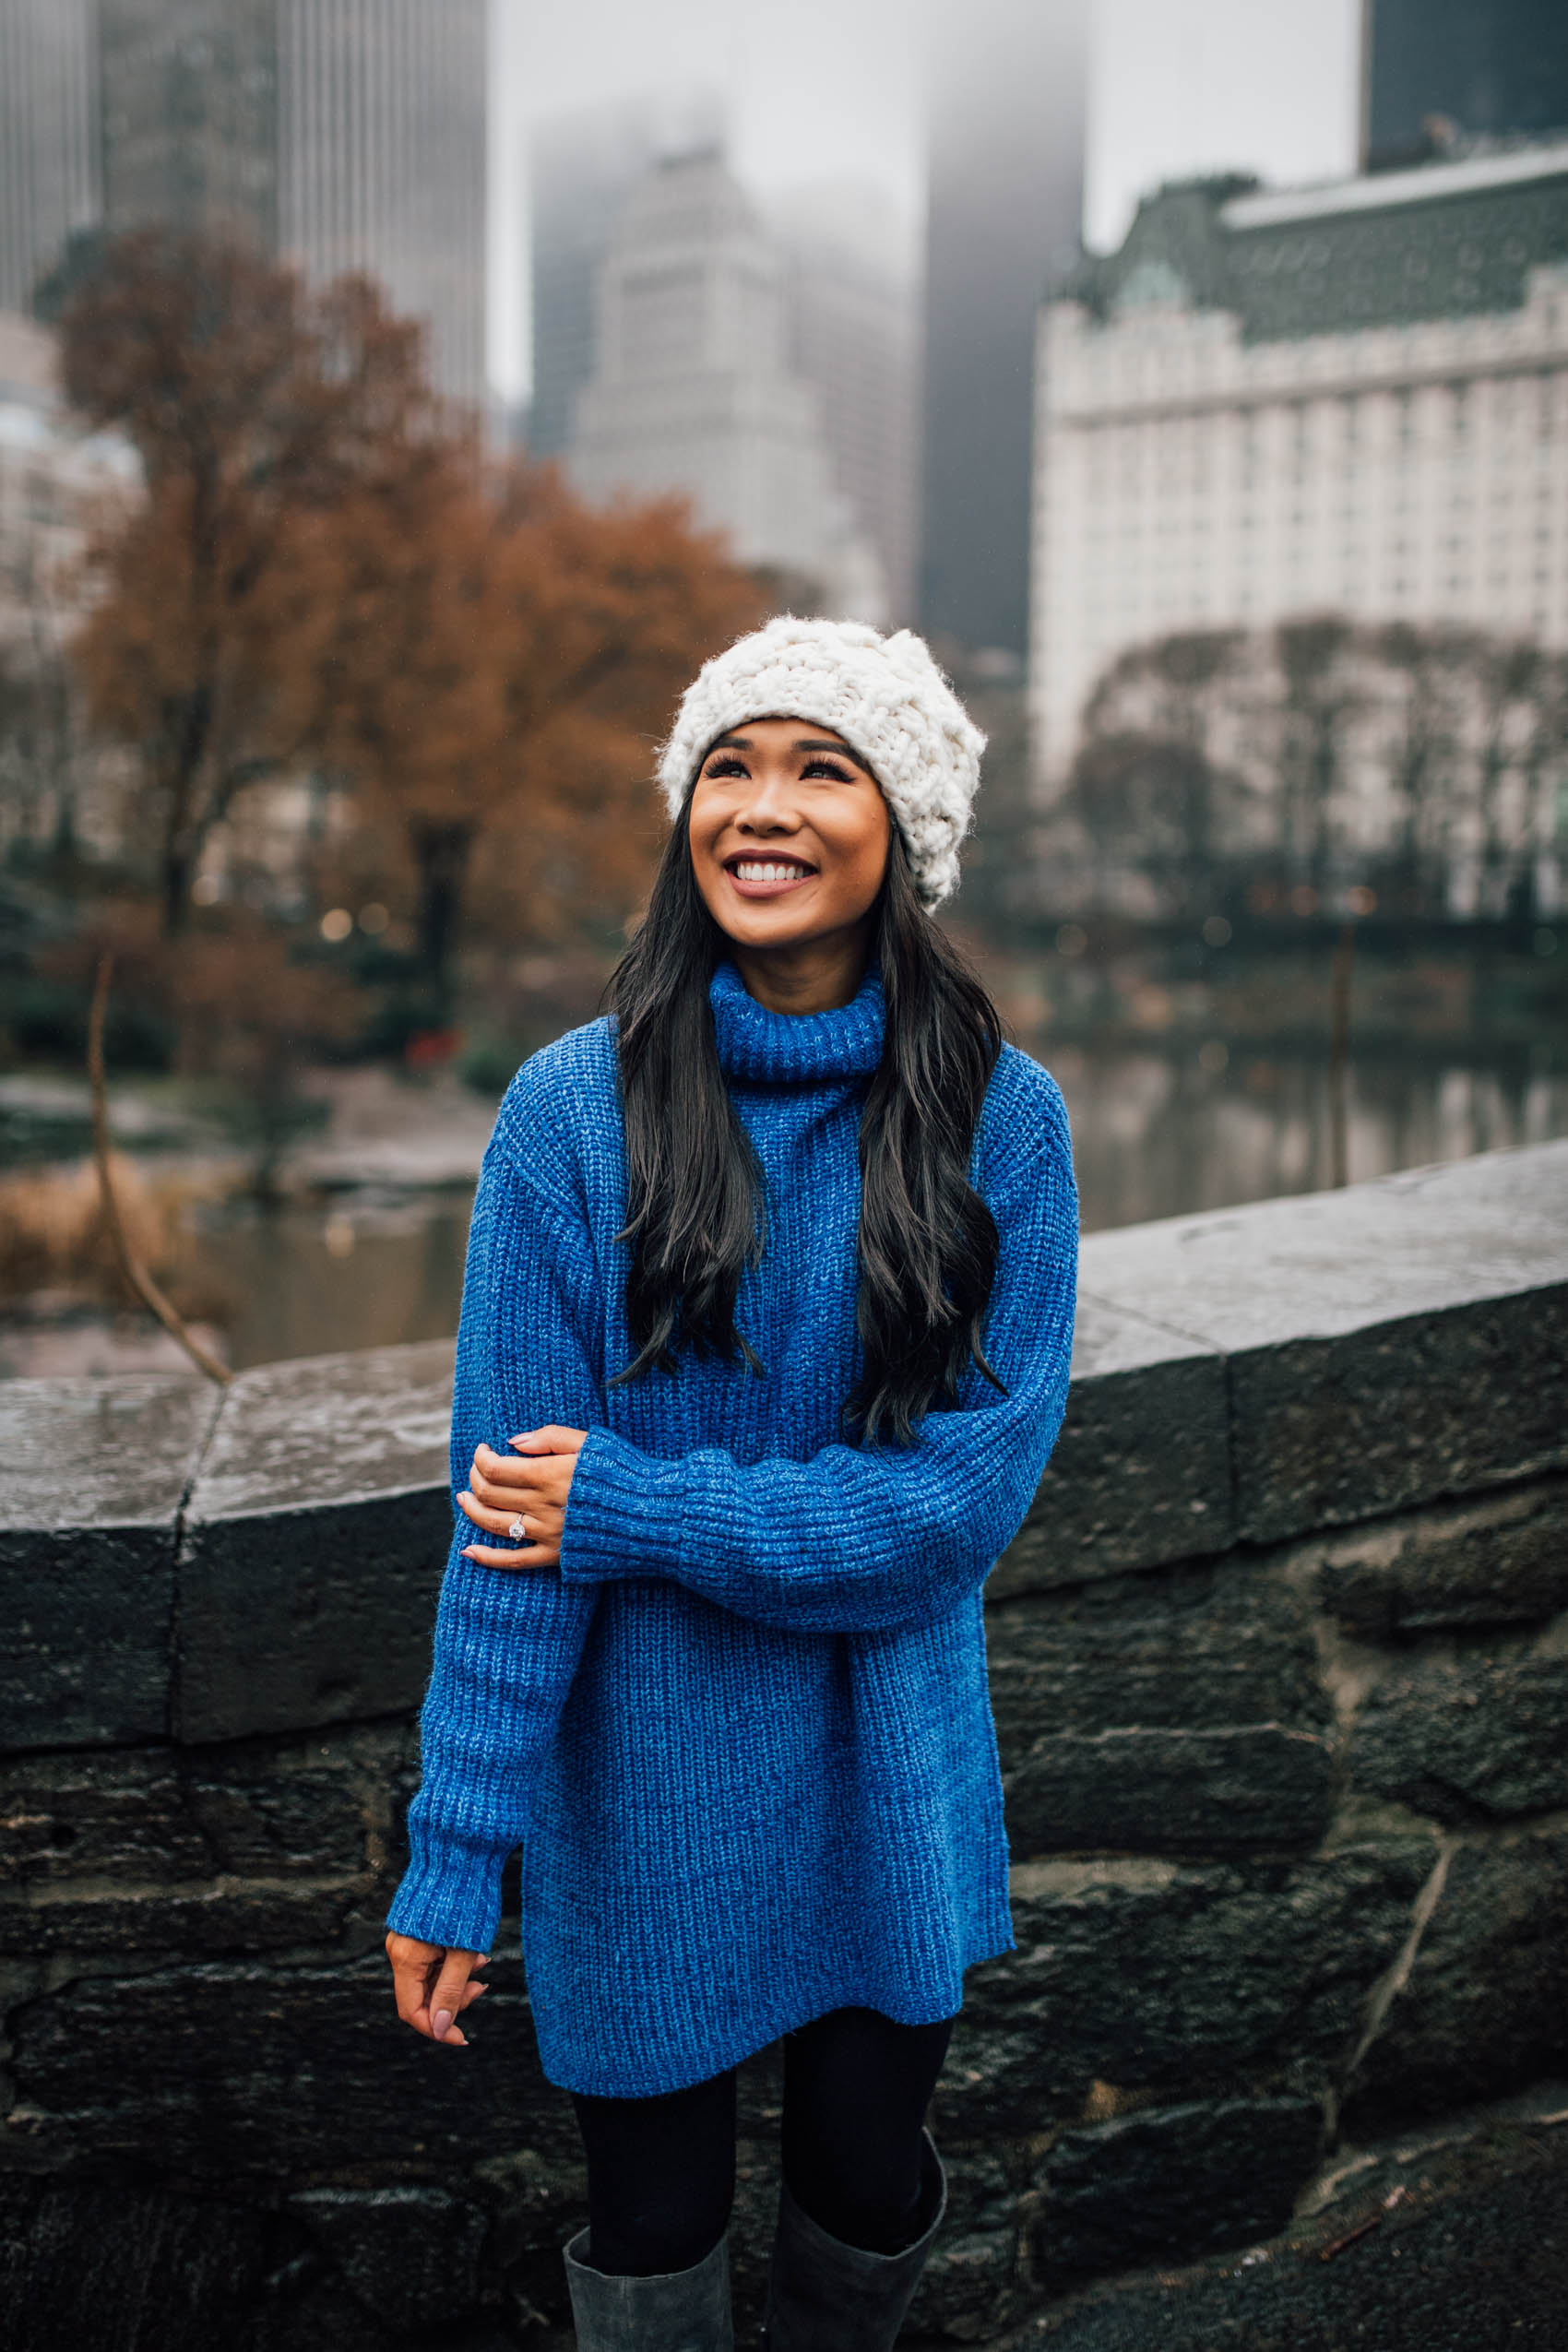 Blogger Hoang-Kim wears a cozy knit tunic with a chunky knit beanie 